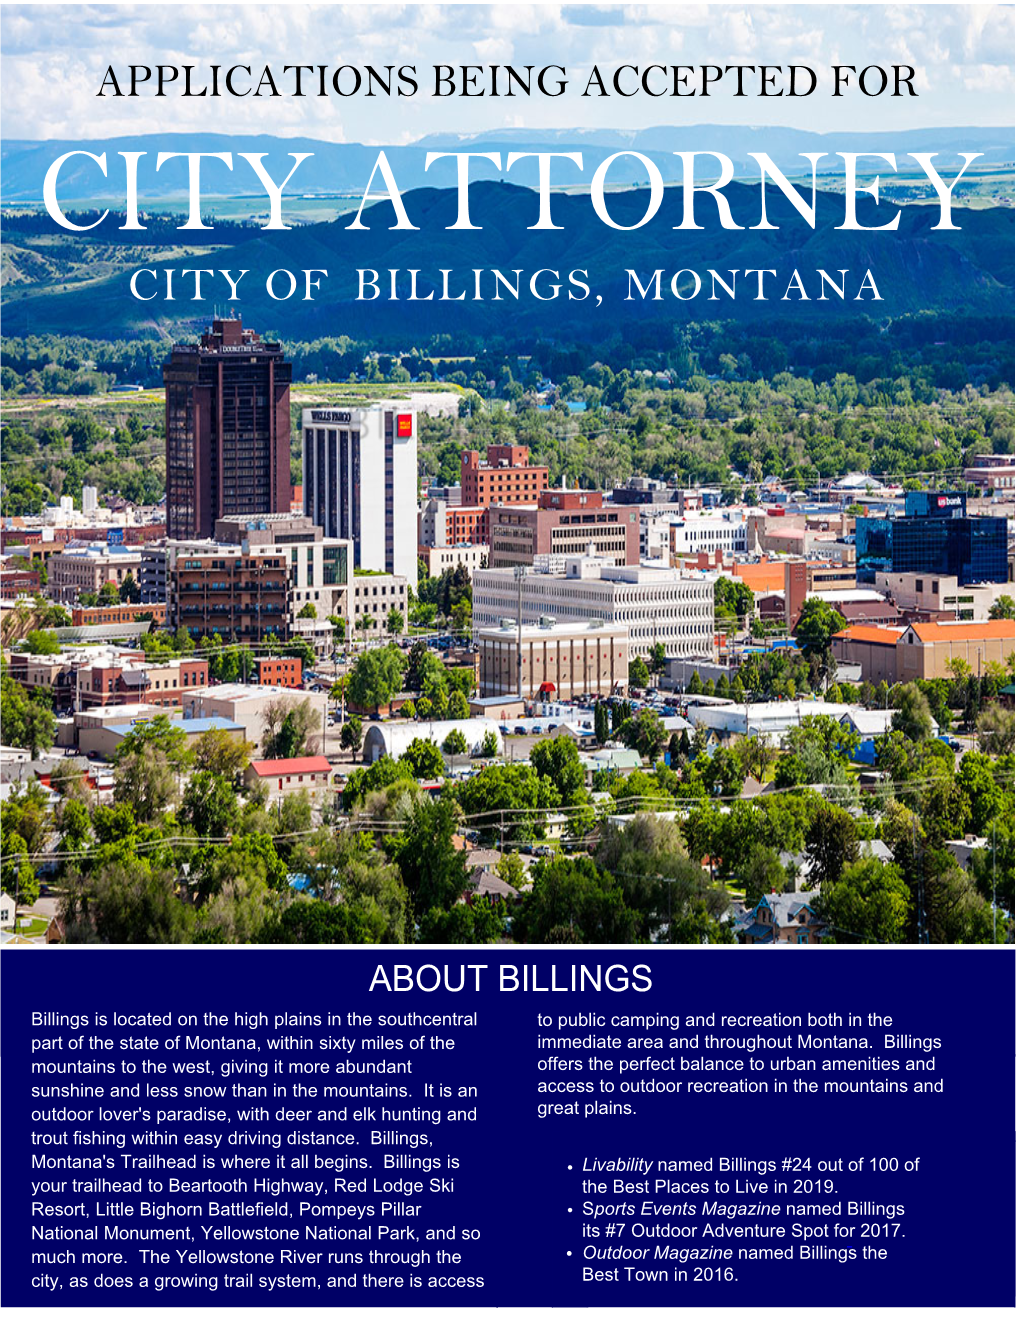 City of Billings, Montana Applications Being